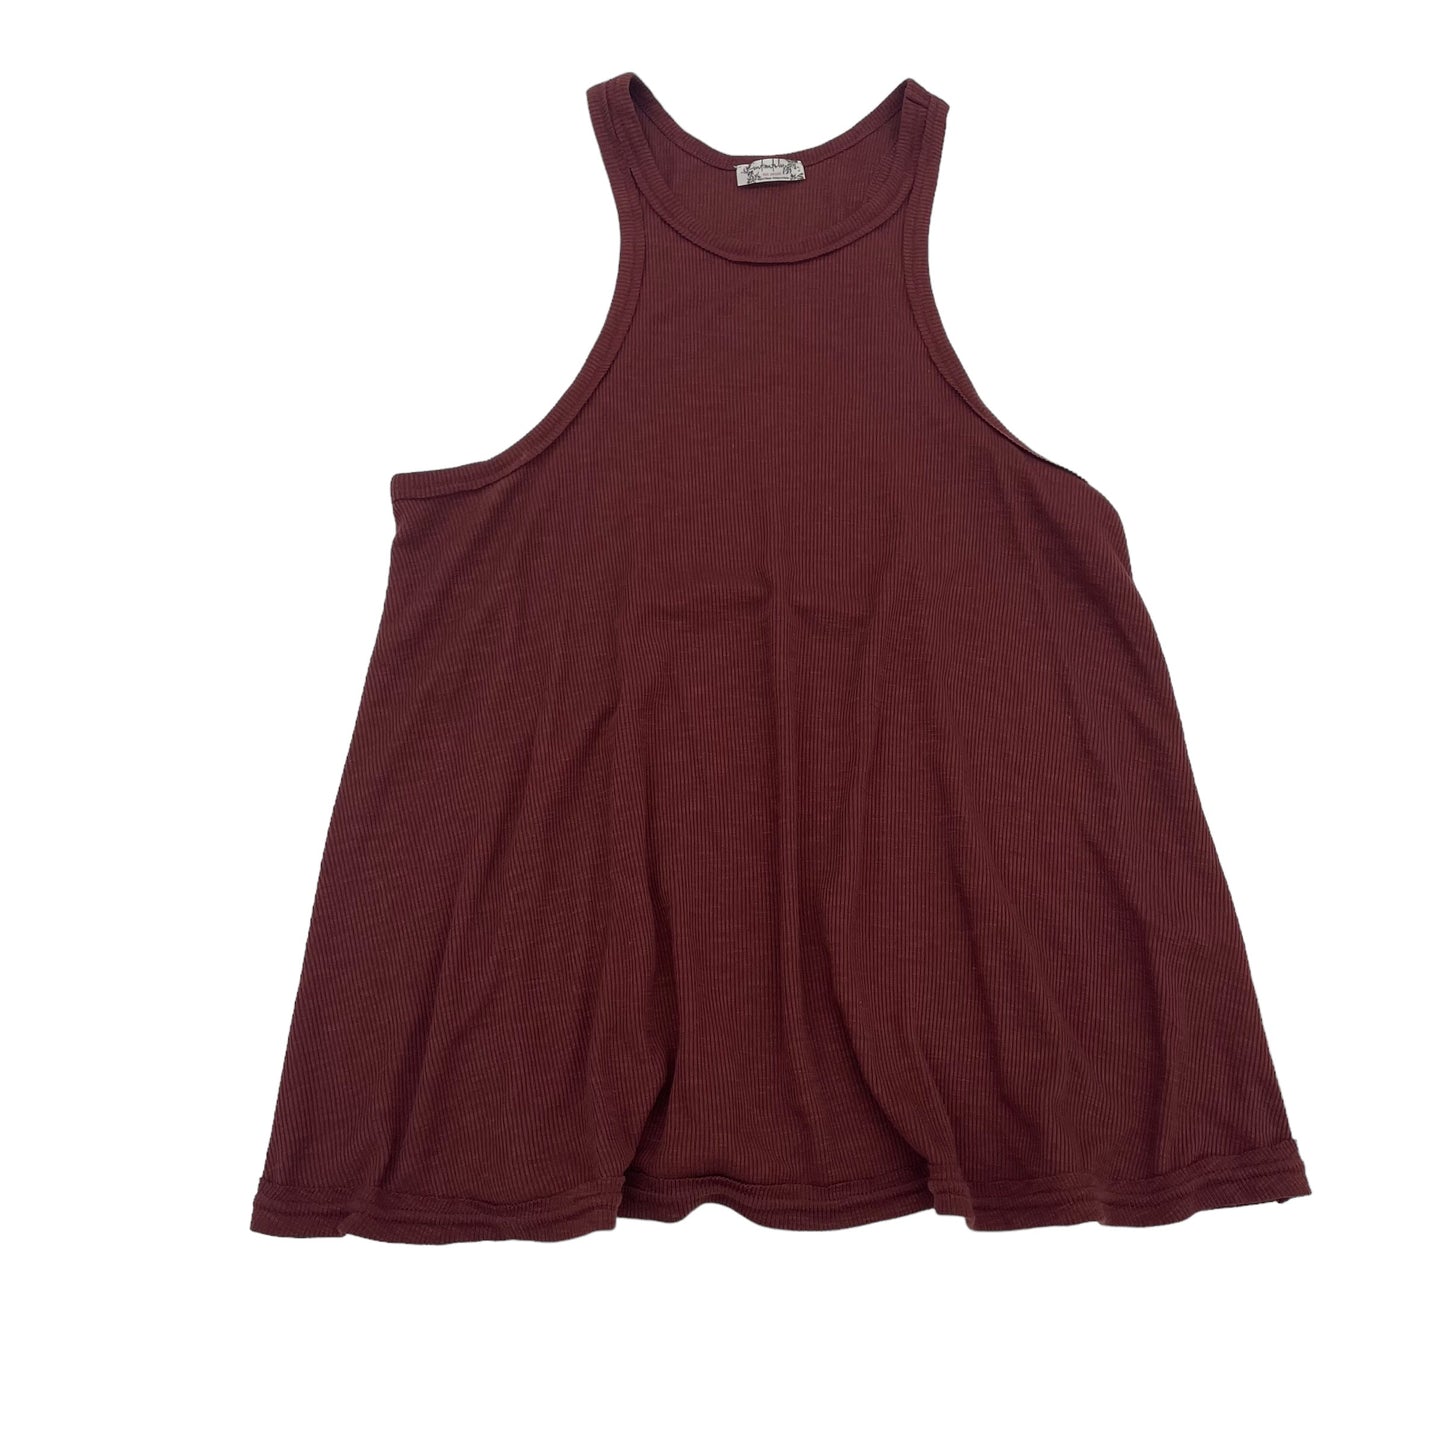 RED TANK TOP by FREE PEOPLE Size:S